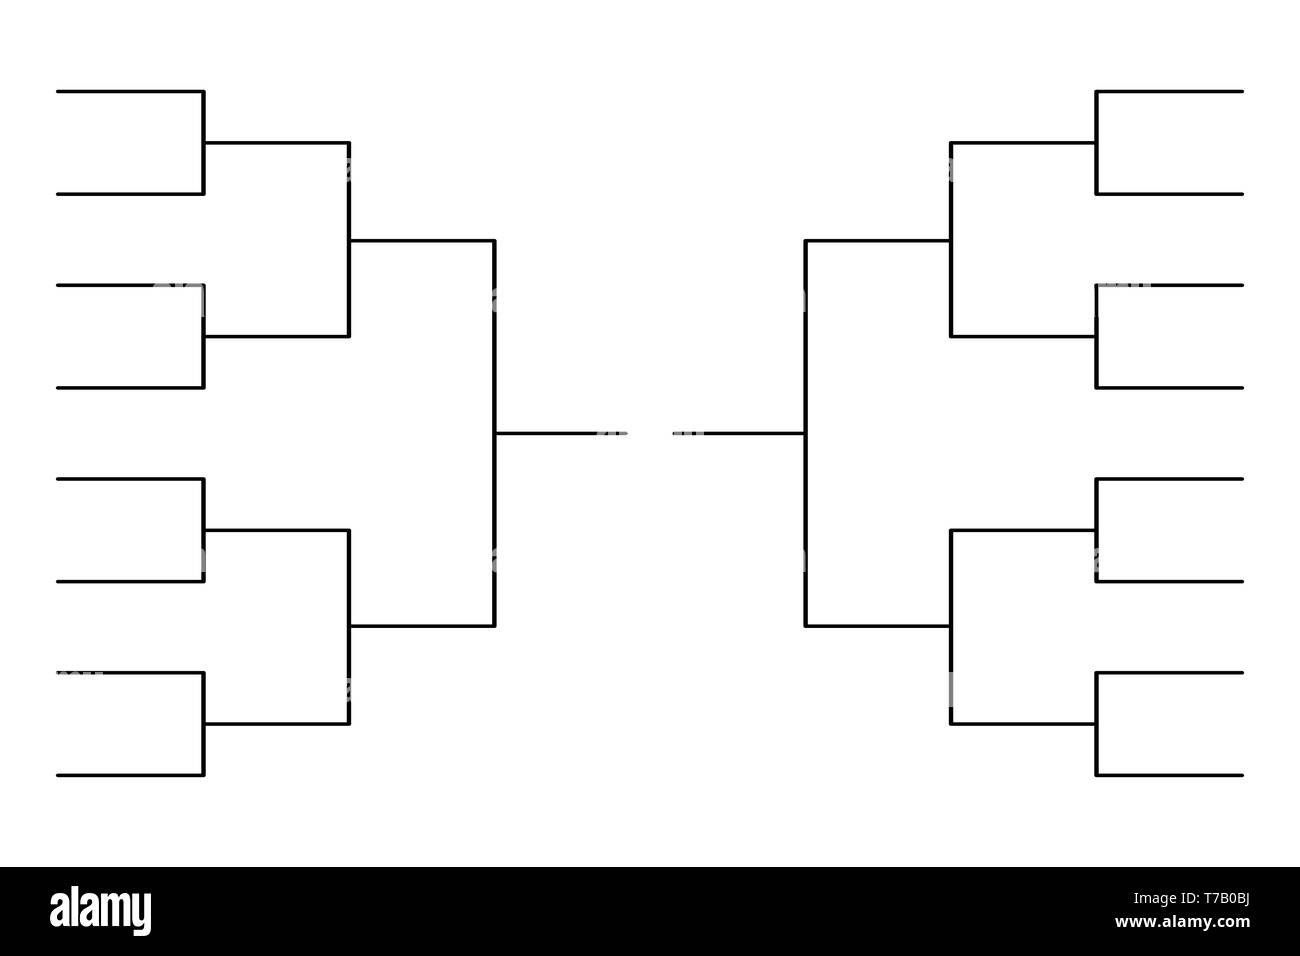 simple-black-tournament-bracket-template-for-16-teams-isolated-on-white